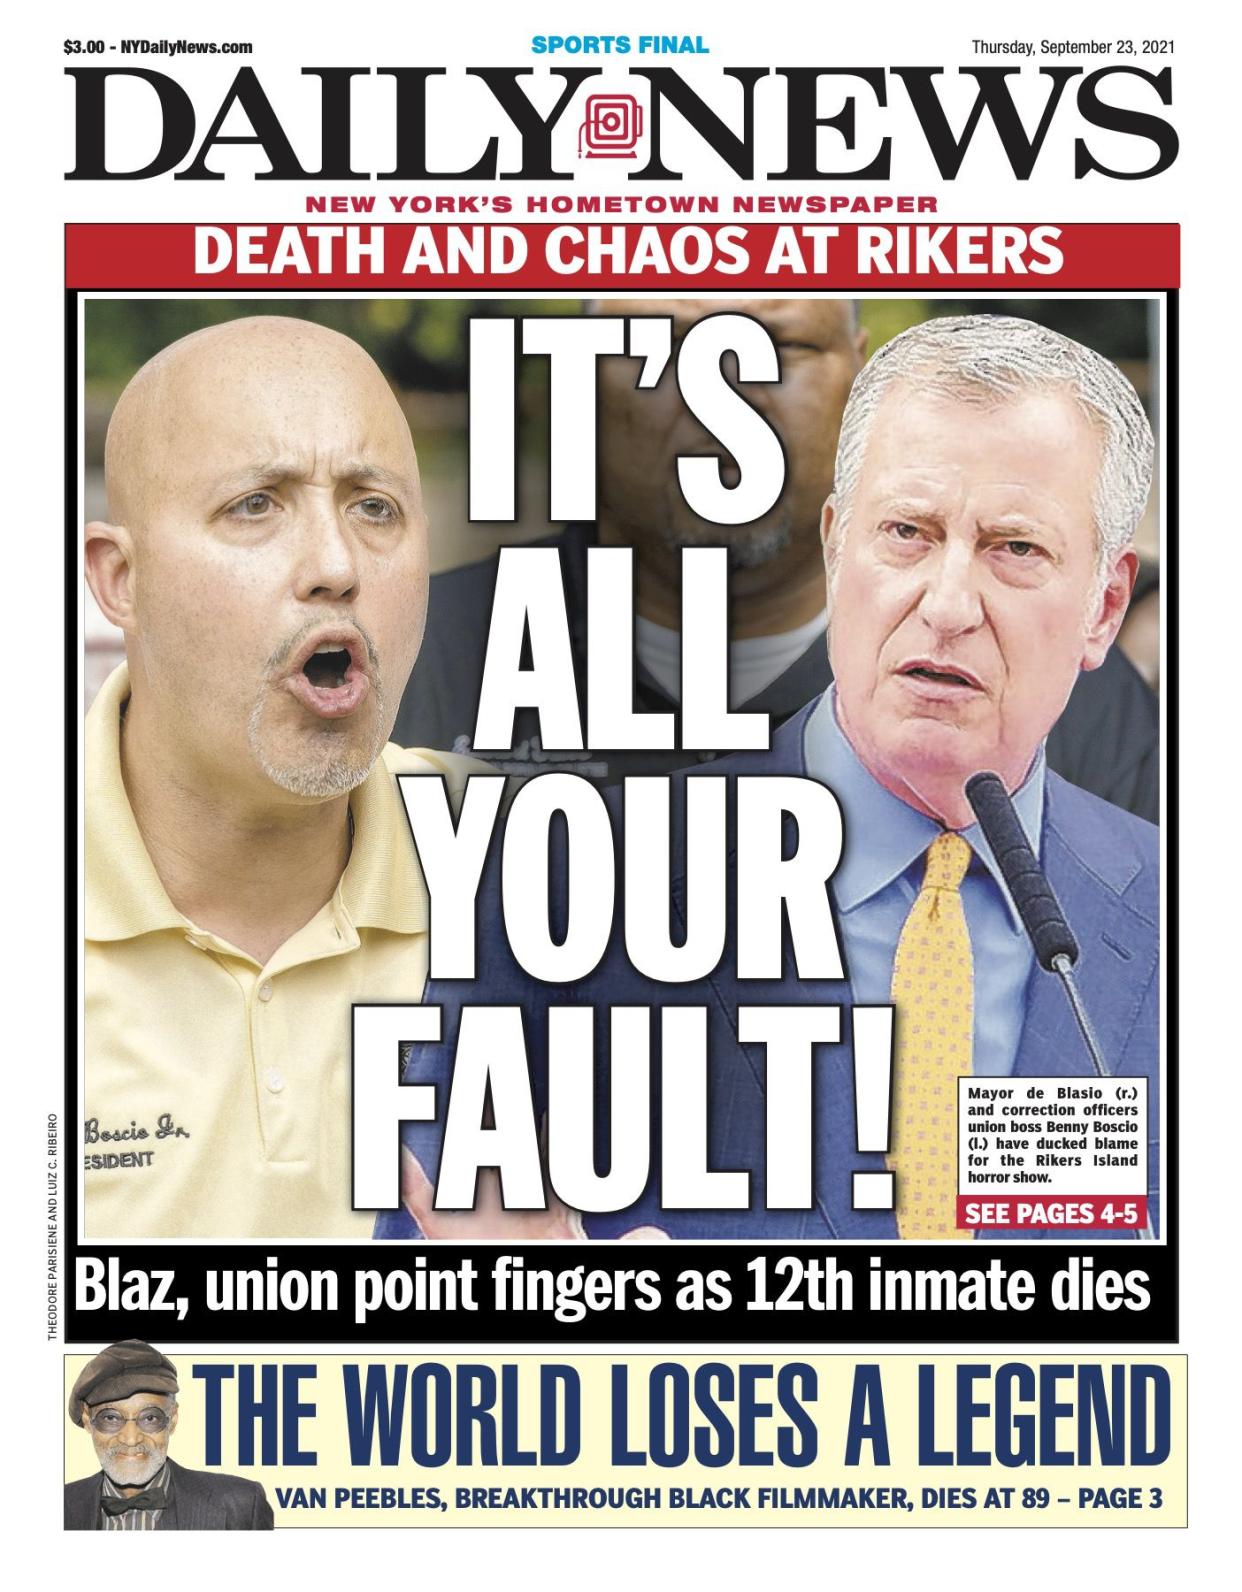 Front page for Sept. 23, 2021: Blaz, union point fingers as 12th inmate dies. Mayor de Blasio (r.) and correction officers union boss Benny Boscio (l.) have ducked blame for the Rikers Island horror show.